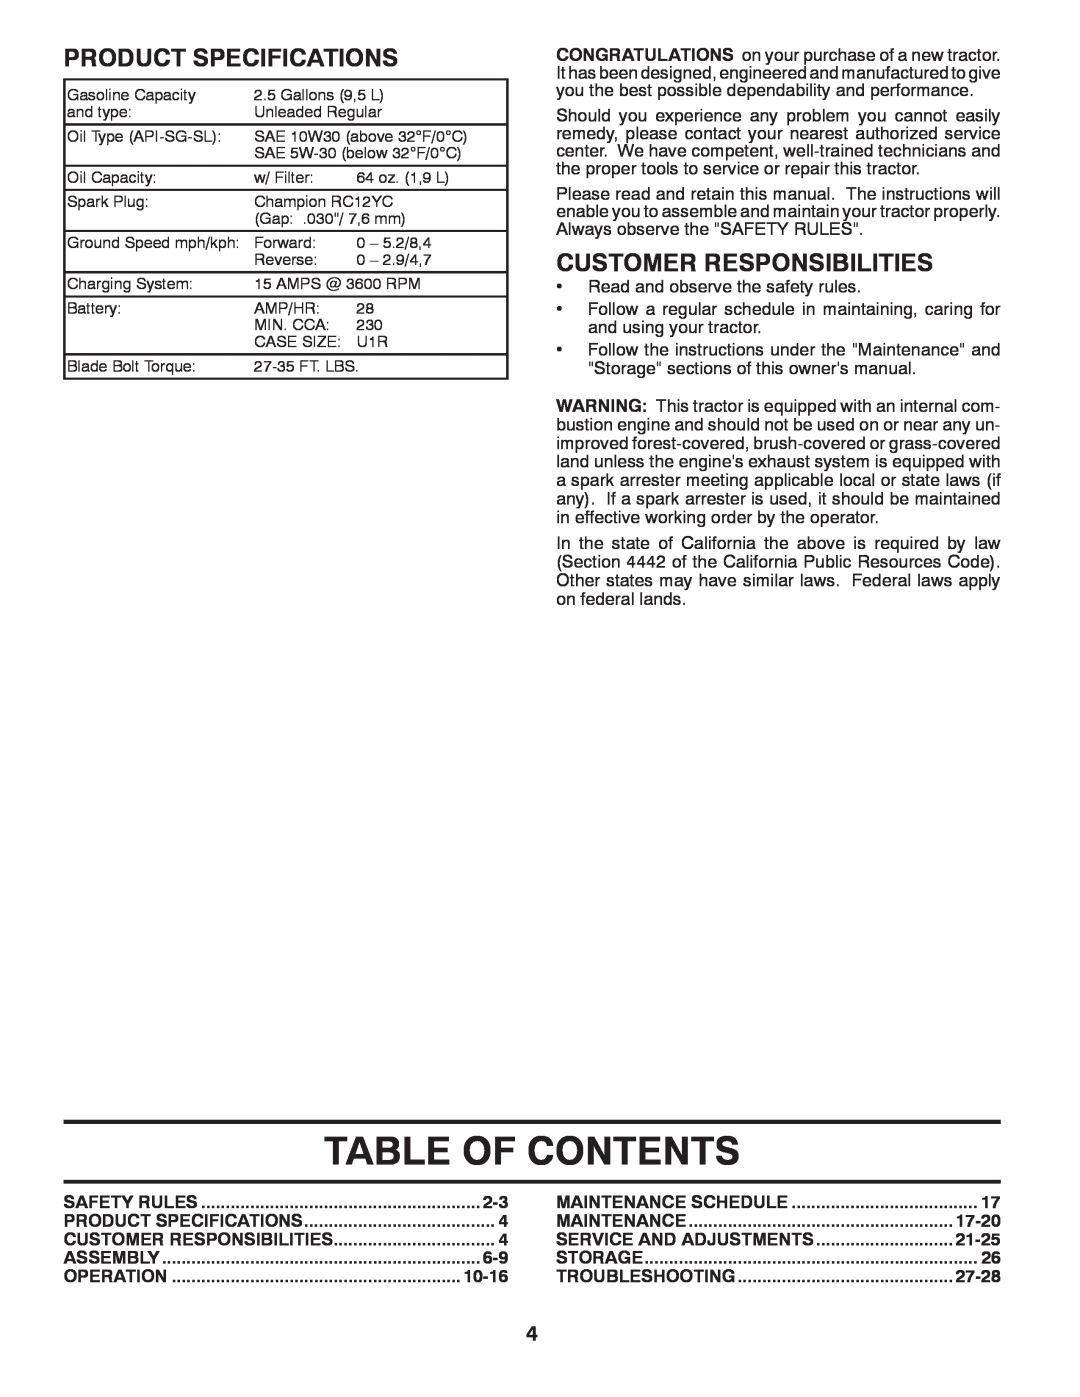 Husqvarna CTH2036T manual Table Of Contents, Product Specifications, Customer Responsibilities 